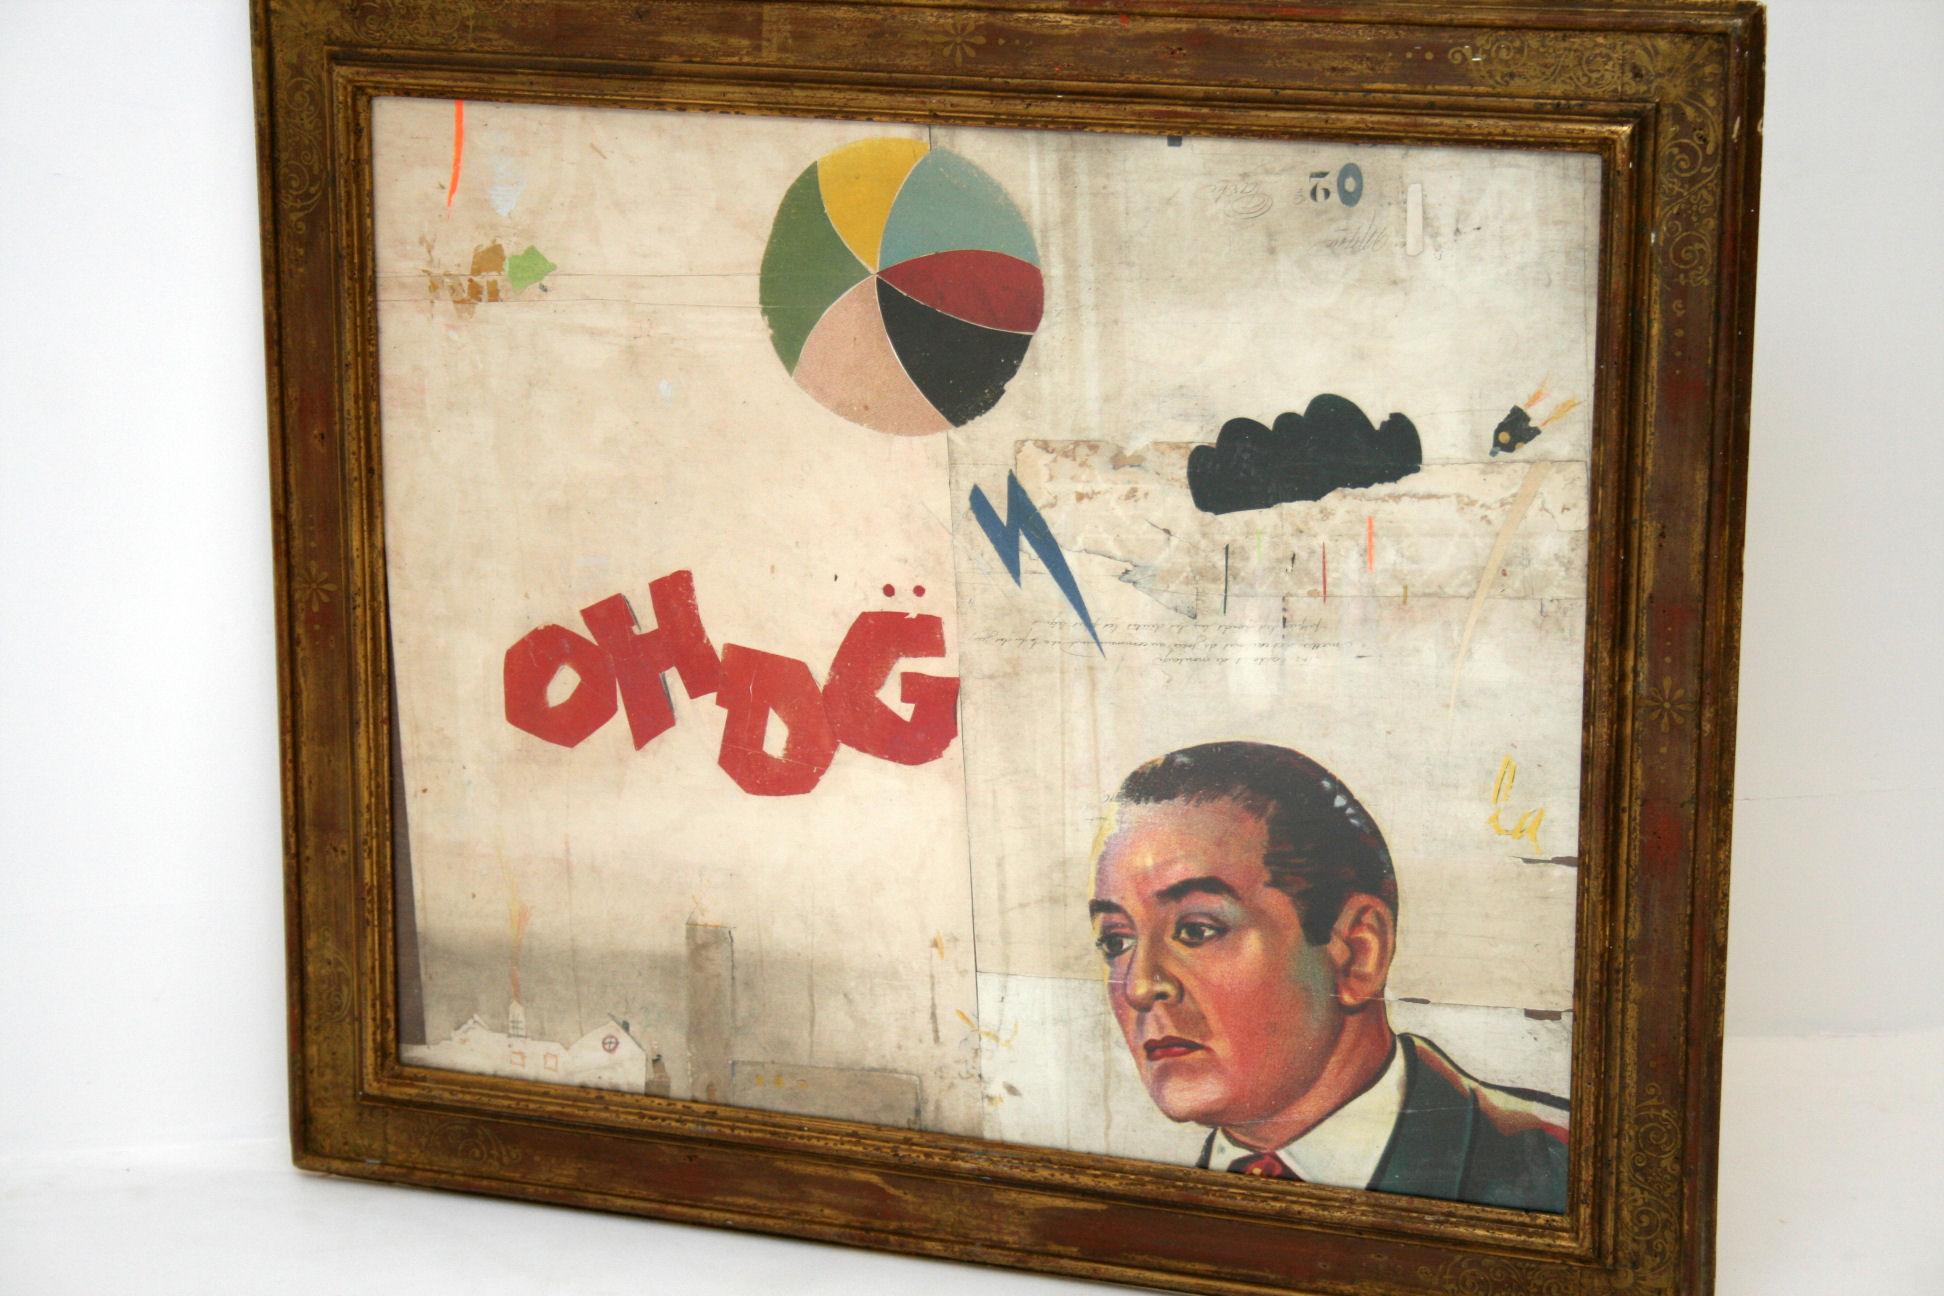 Oh brother
By Artist Huw Griffith
Collage: 19th century French ephemera, film
posters from ‘30s, ‘40s & ‘50s, graphite crayons
and household paint.
The collage has been placed into an antique frame which has been reworked by Huw and is part of